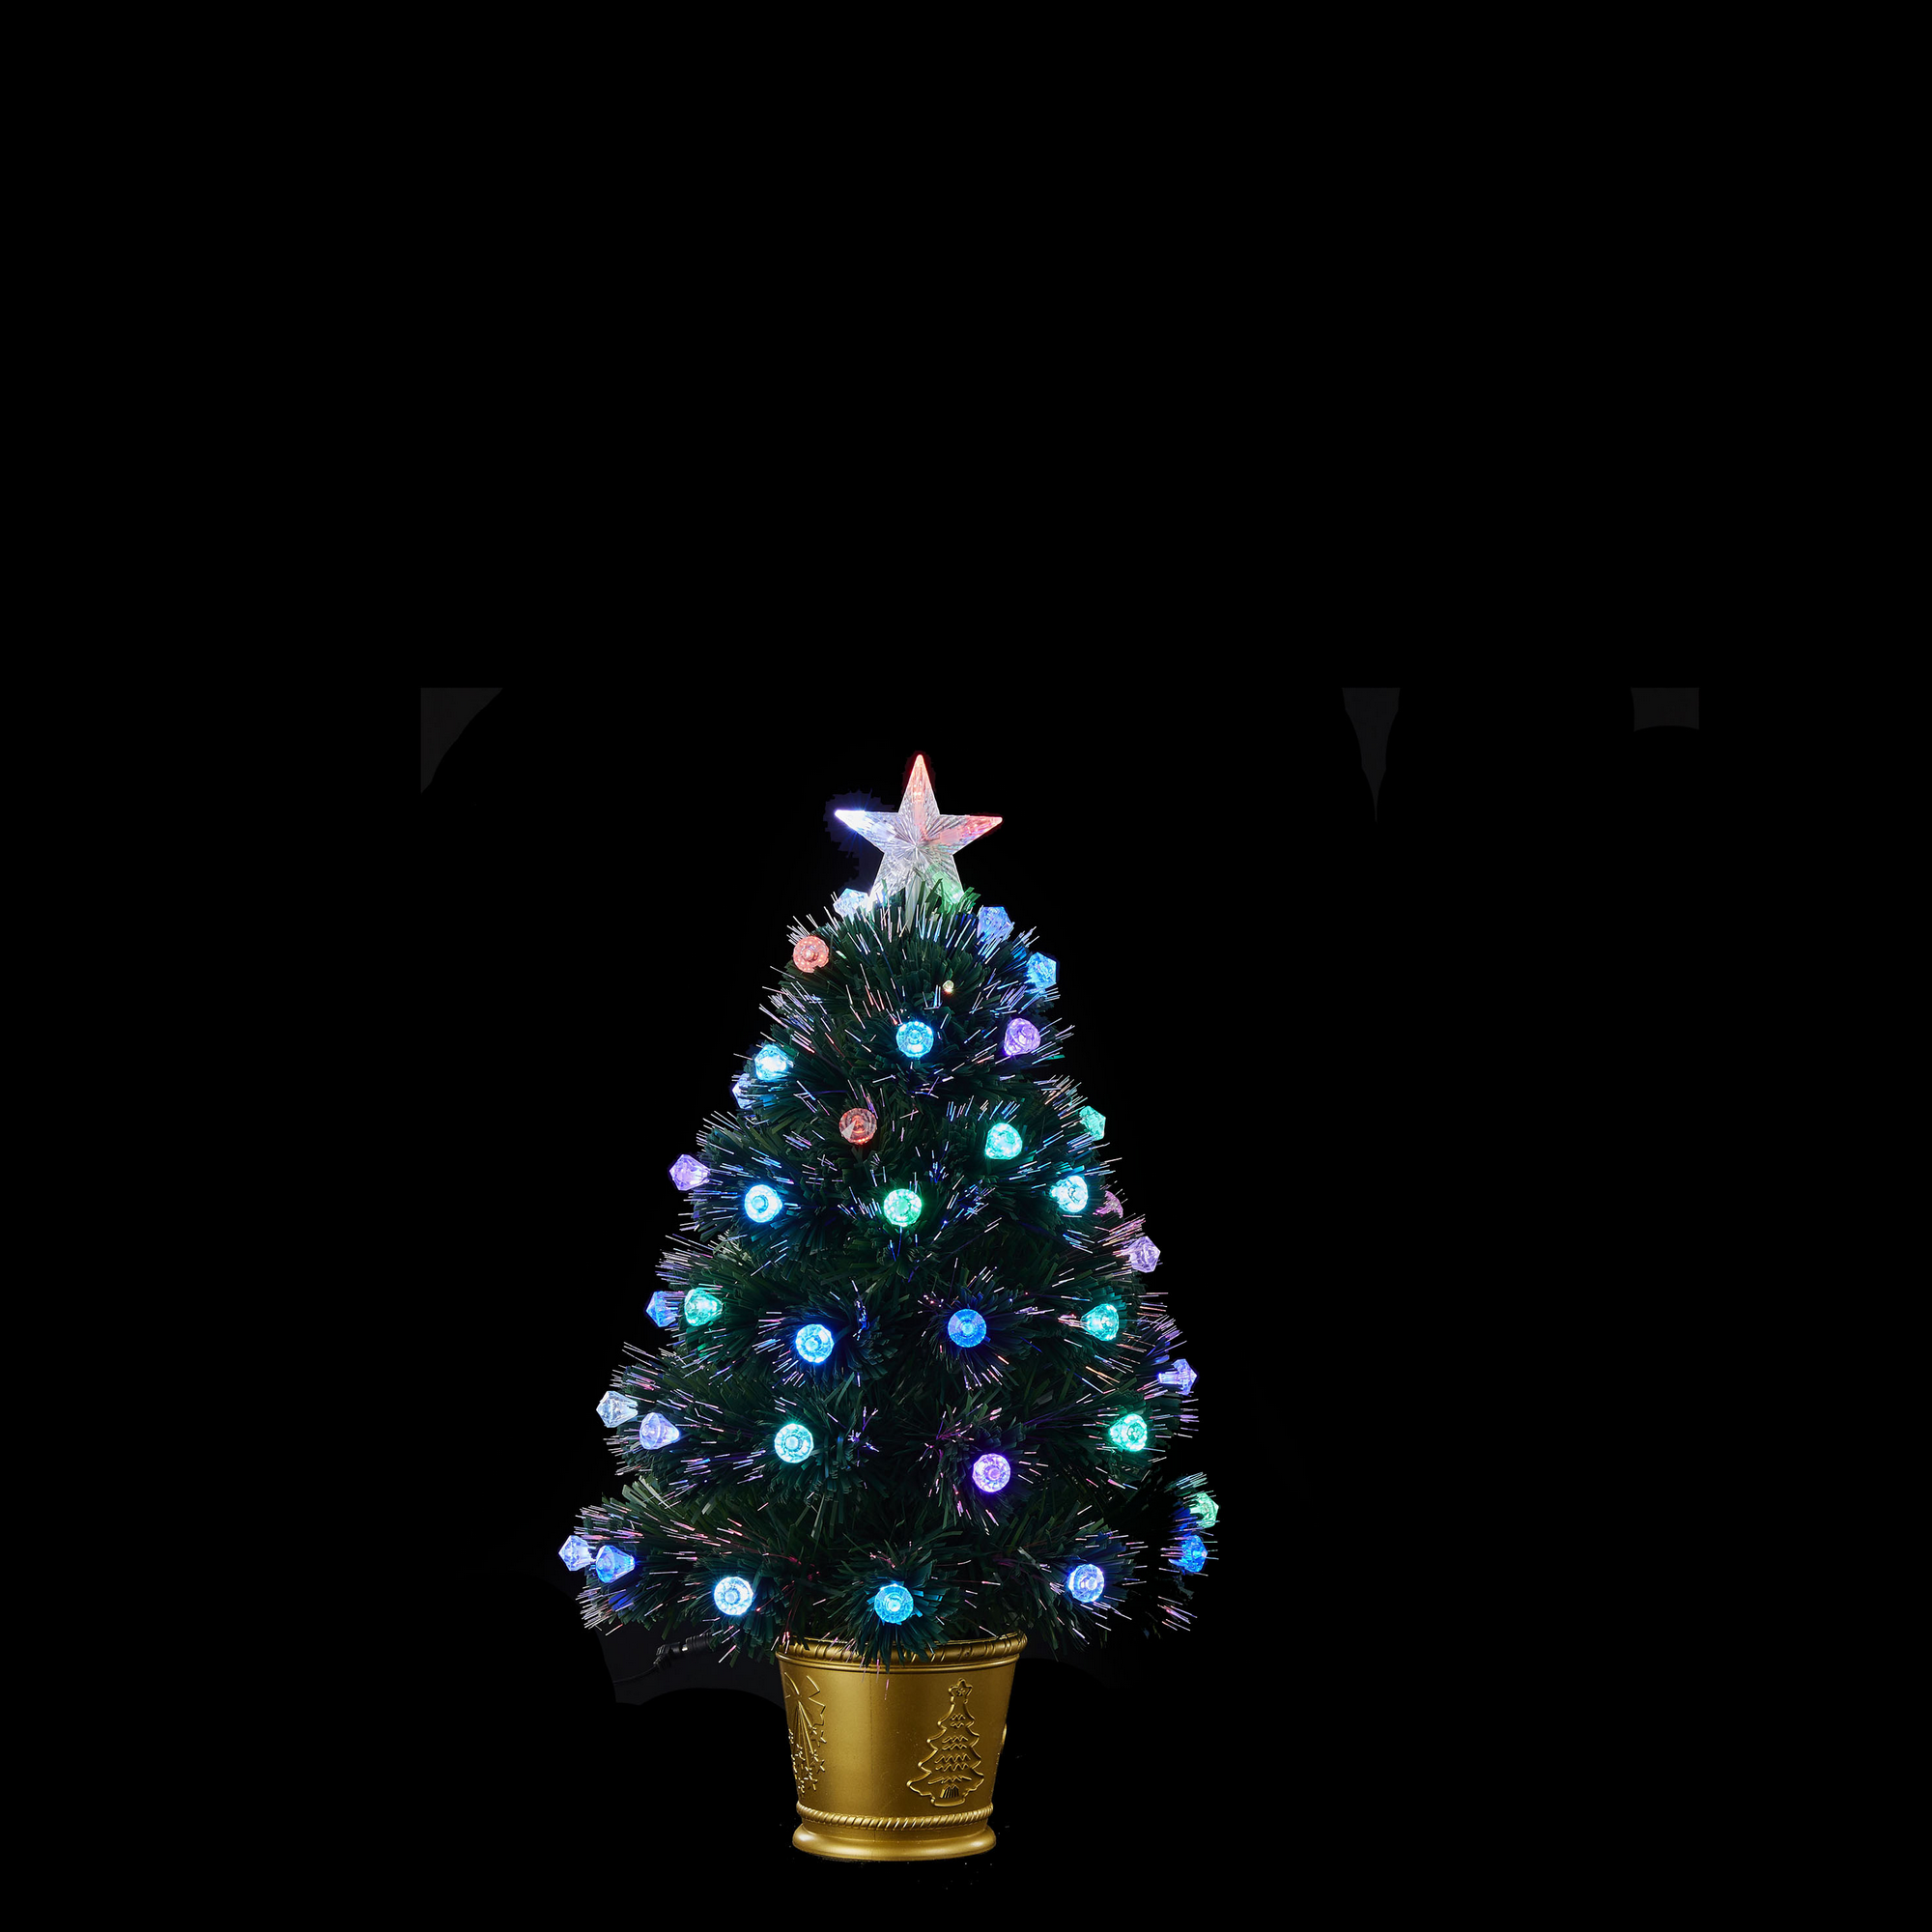 Weihnachtsbaum in Glasfaser 60 cm, mit LED-Beleuchtung + product picture